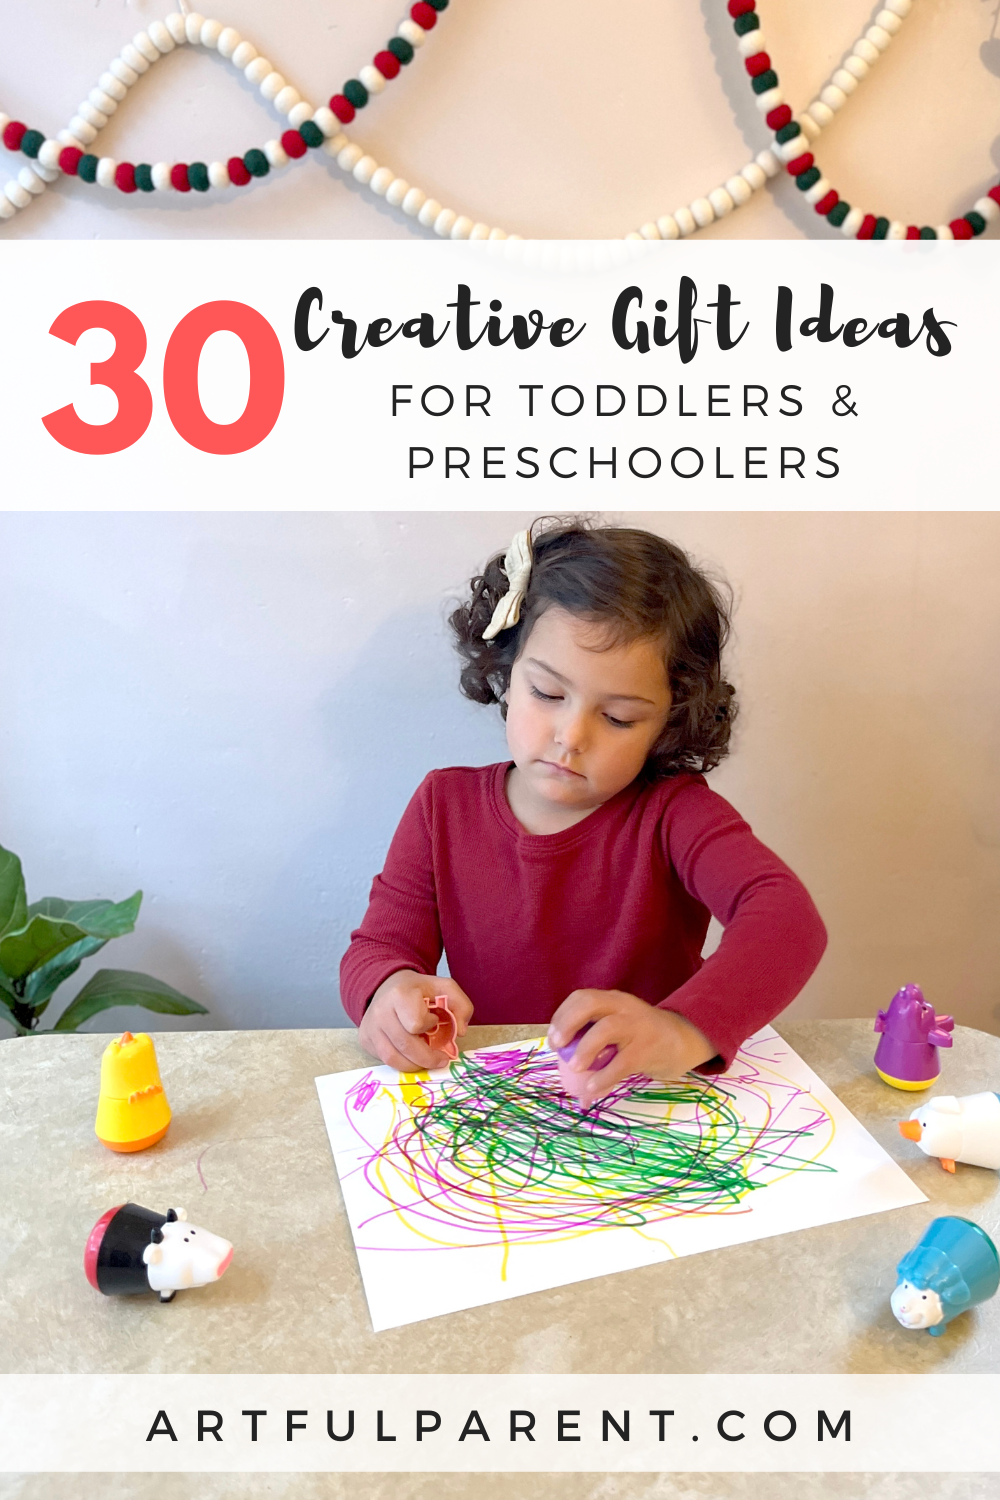 Creative Gift Ideas for Toddlers & Preschoolers